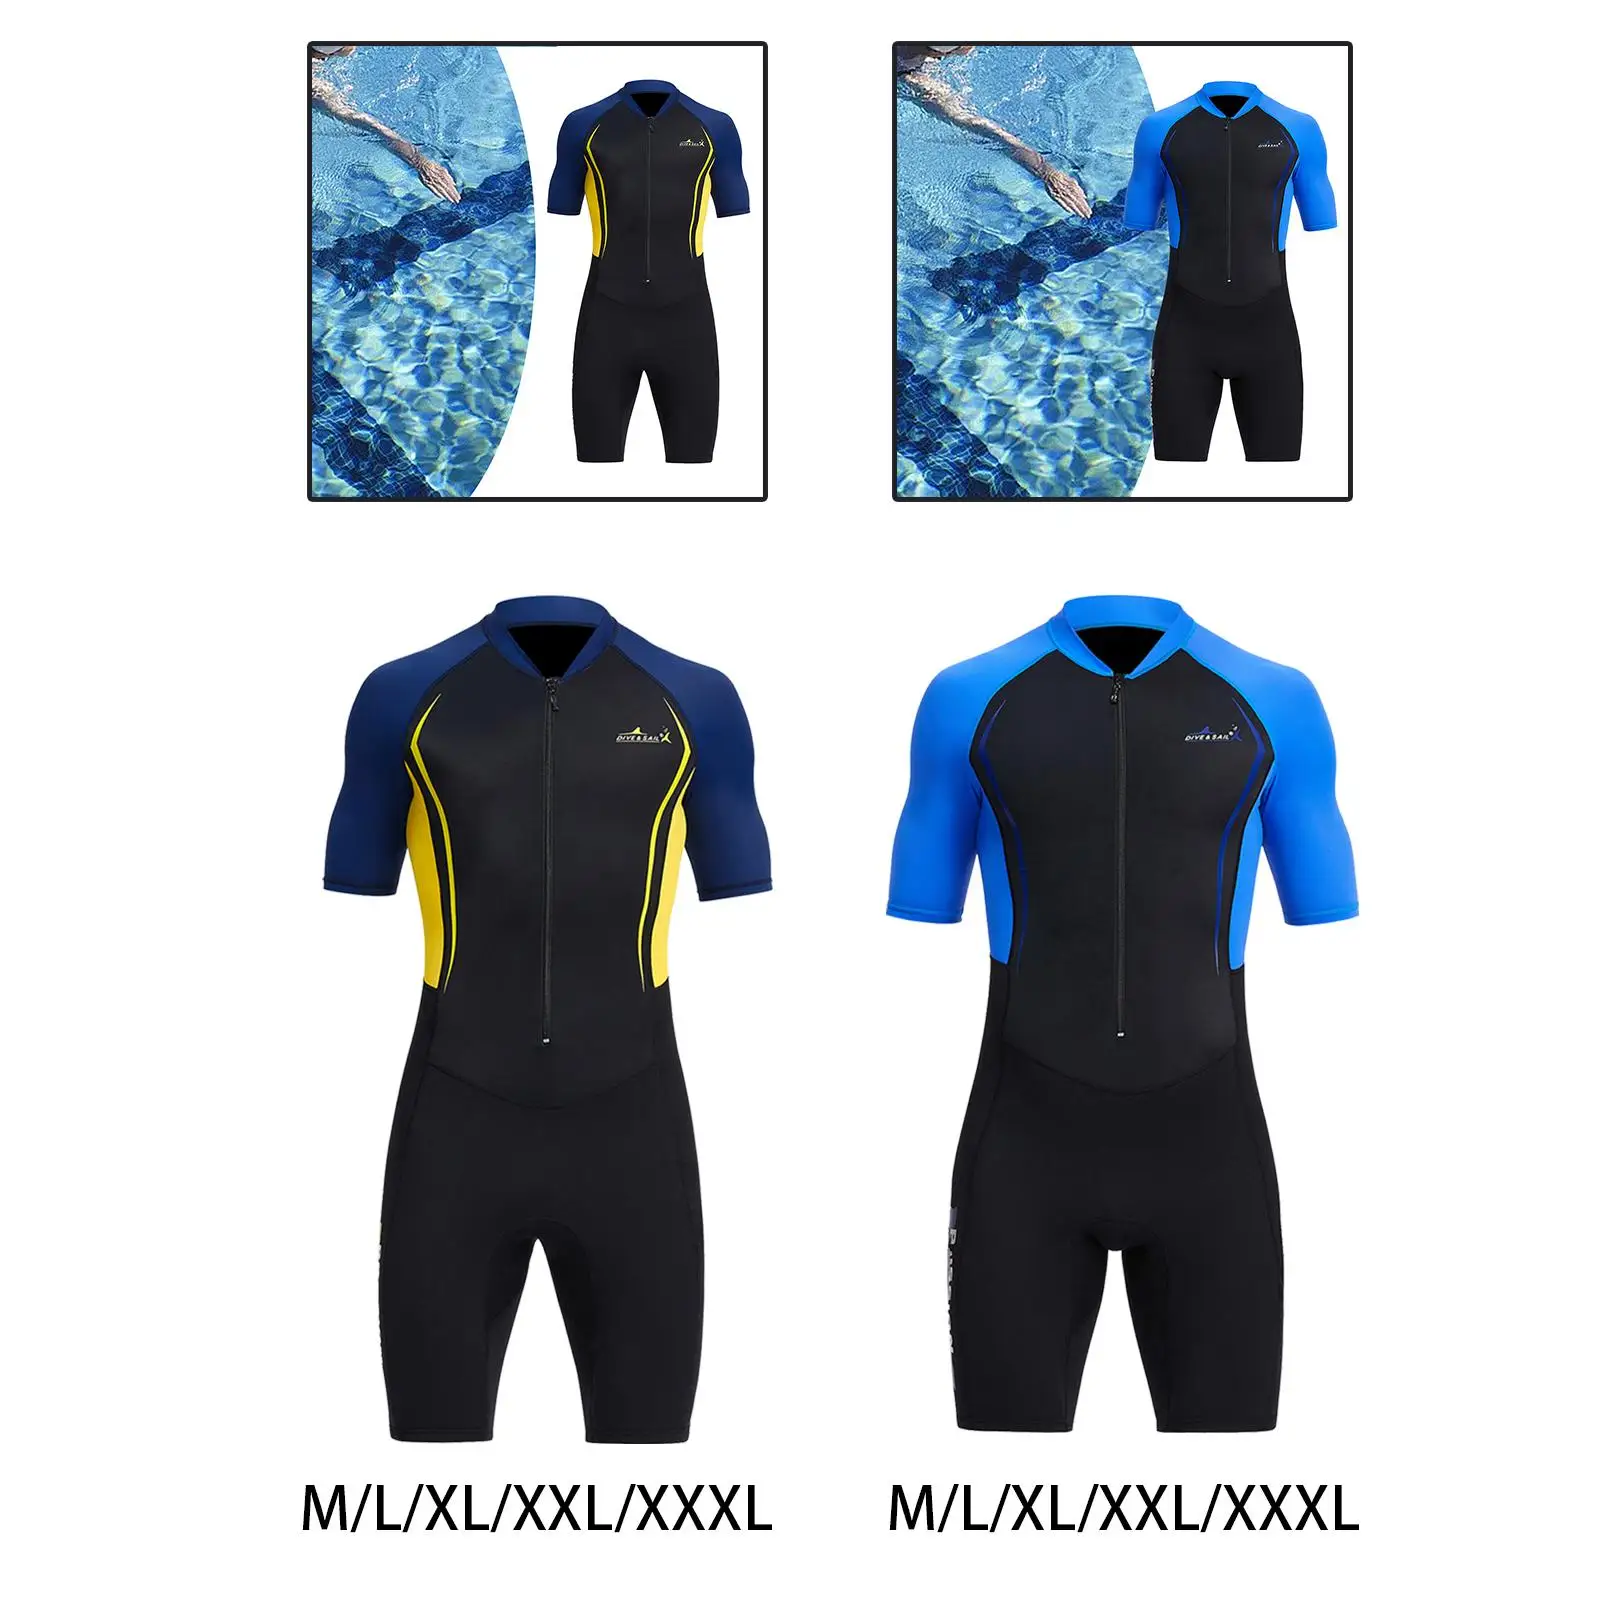 Mens Shorty Wetsuit One Piece Sun Protective Diving Suit for Surfing Swimming